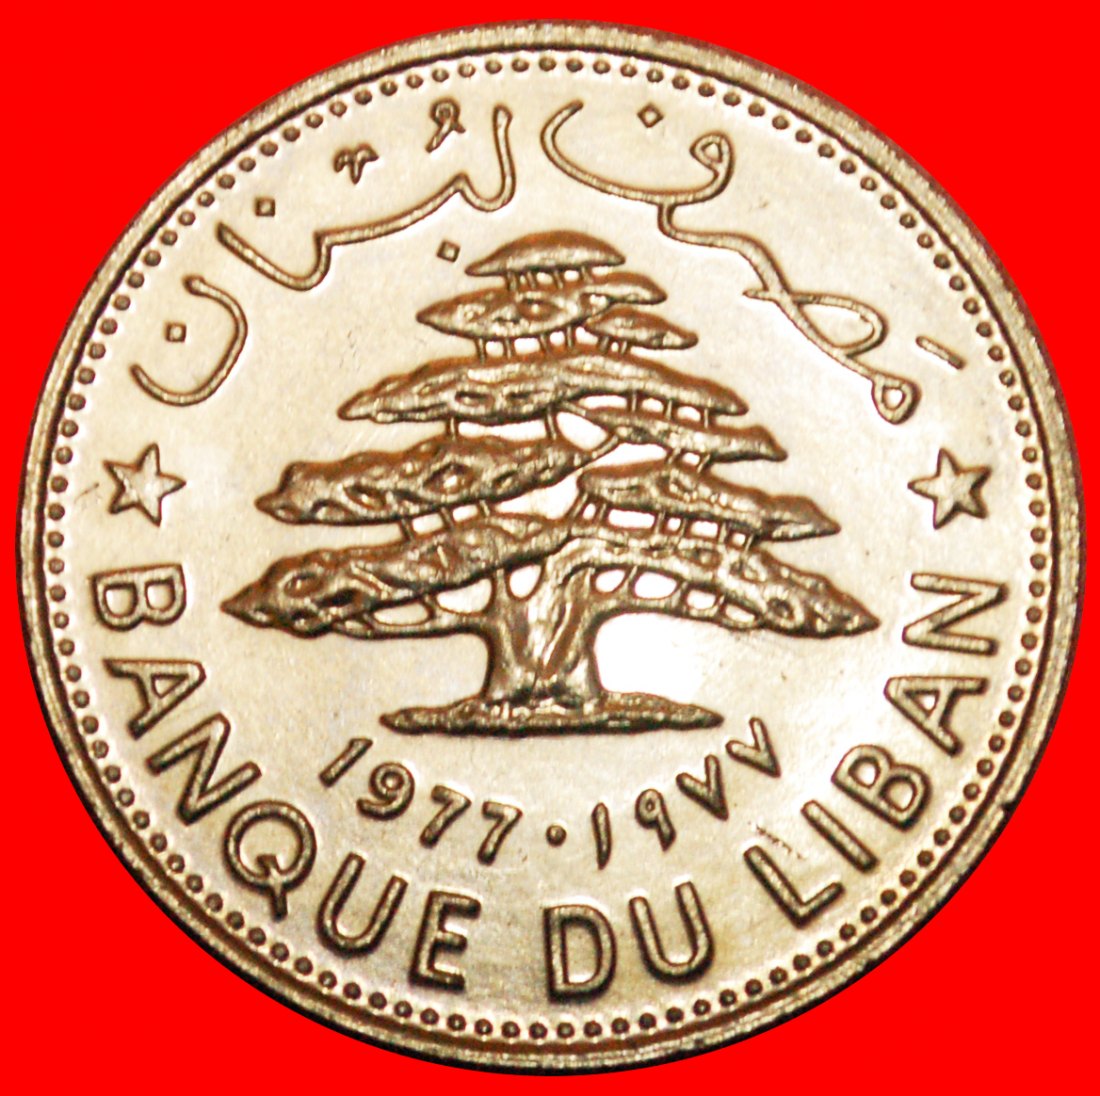  · GREAT BRITAIN: LEBANON ★ 1 POUND 1977 MINT LUSTER! DISCOVERY COIN! LOW START★ NO RESERVE!   